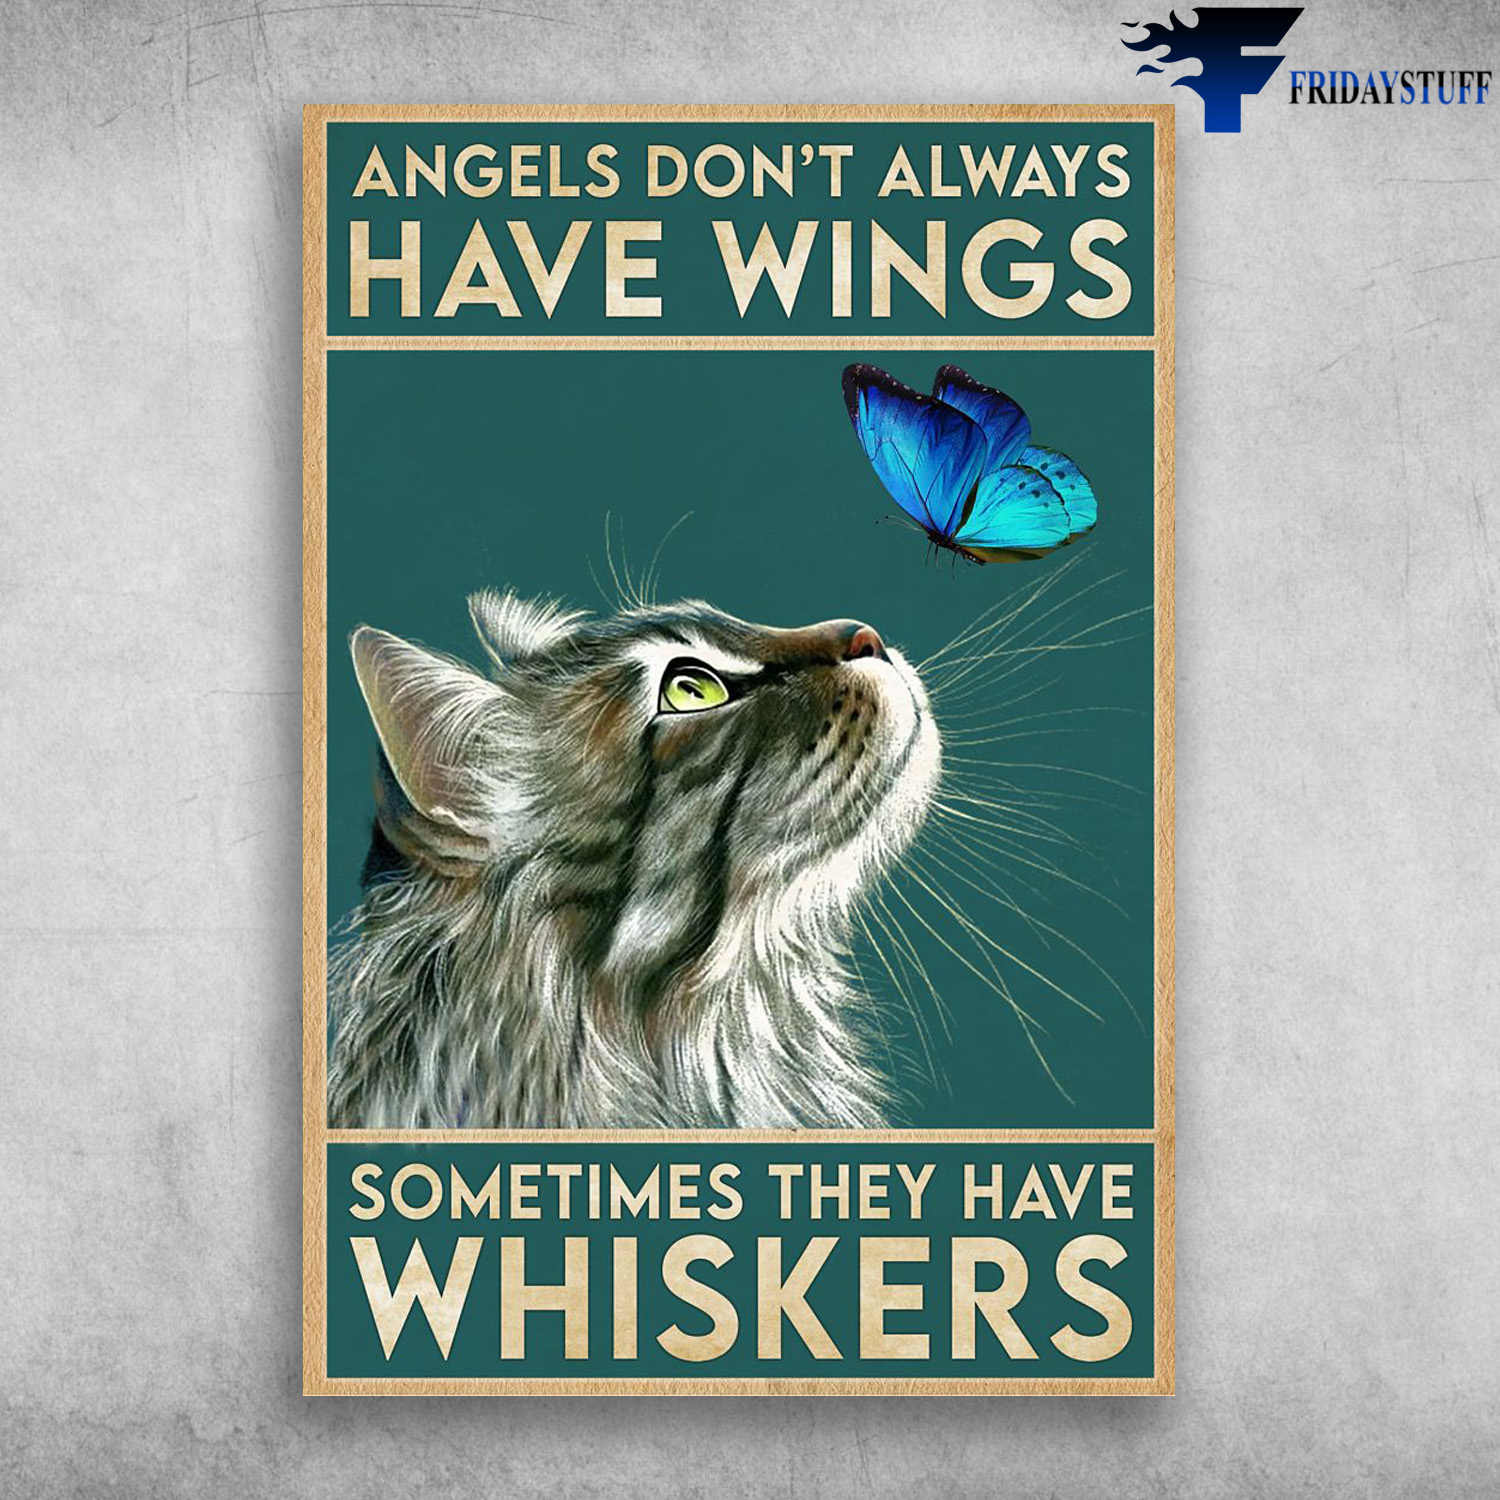 Maine Coon And Butterfly - Angels Don't Always Have Wings, Sometimes They Have Whishers